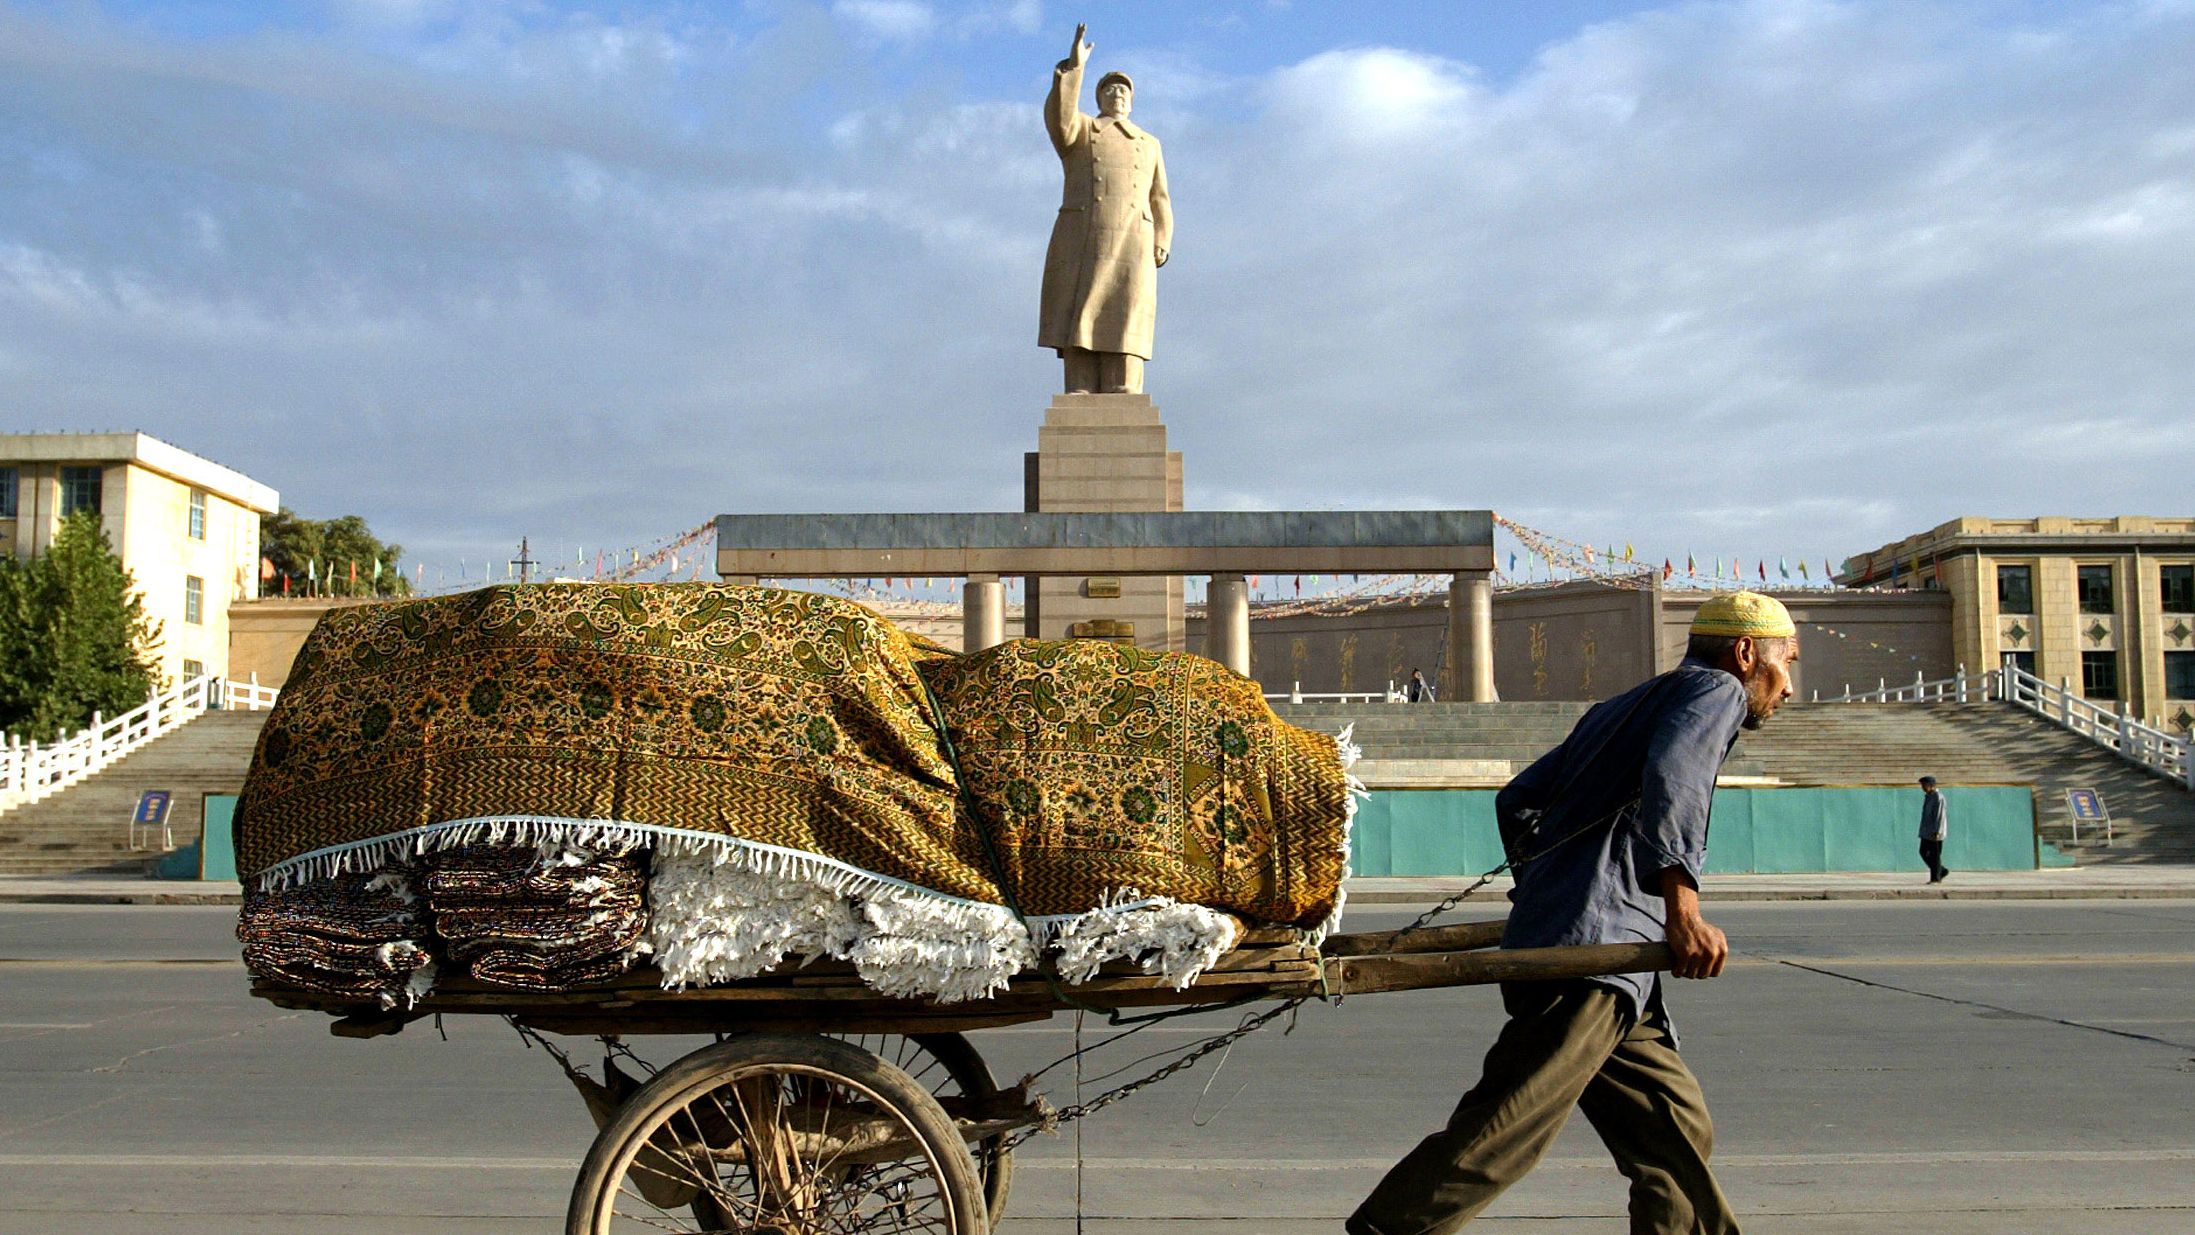 A Uyghur worker pulls a cart past a giant Mao statue at the People's Square in Kashgar, China, in September 2003.